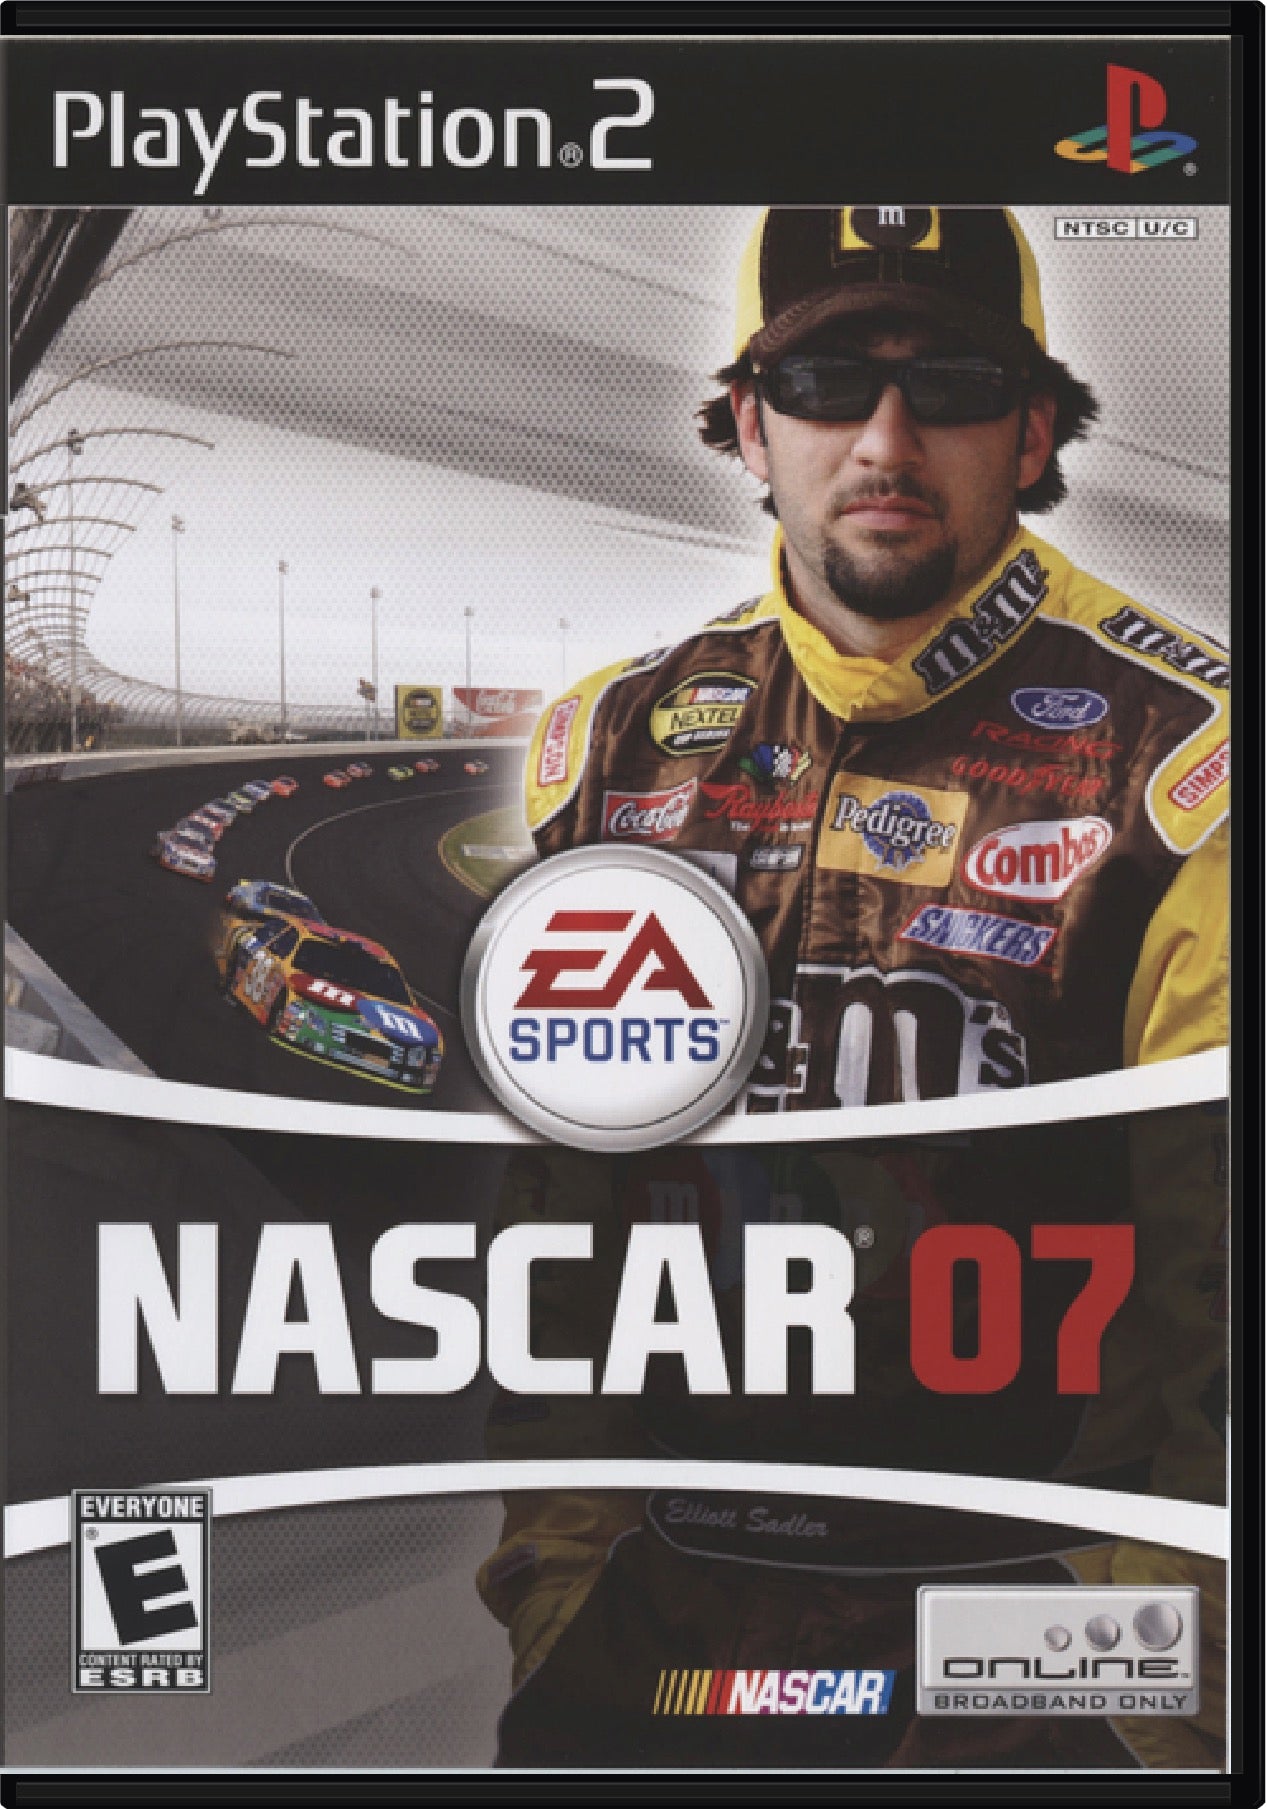 NASCAR 07 Cover Art and Product Photo